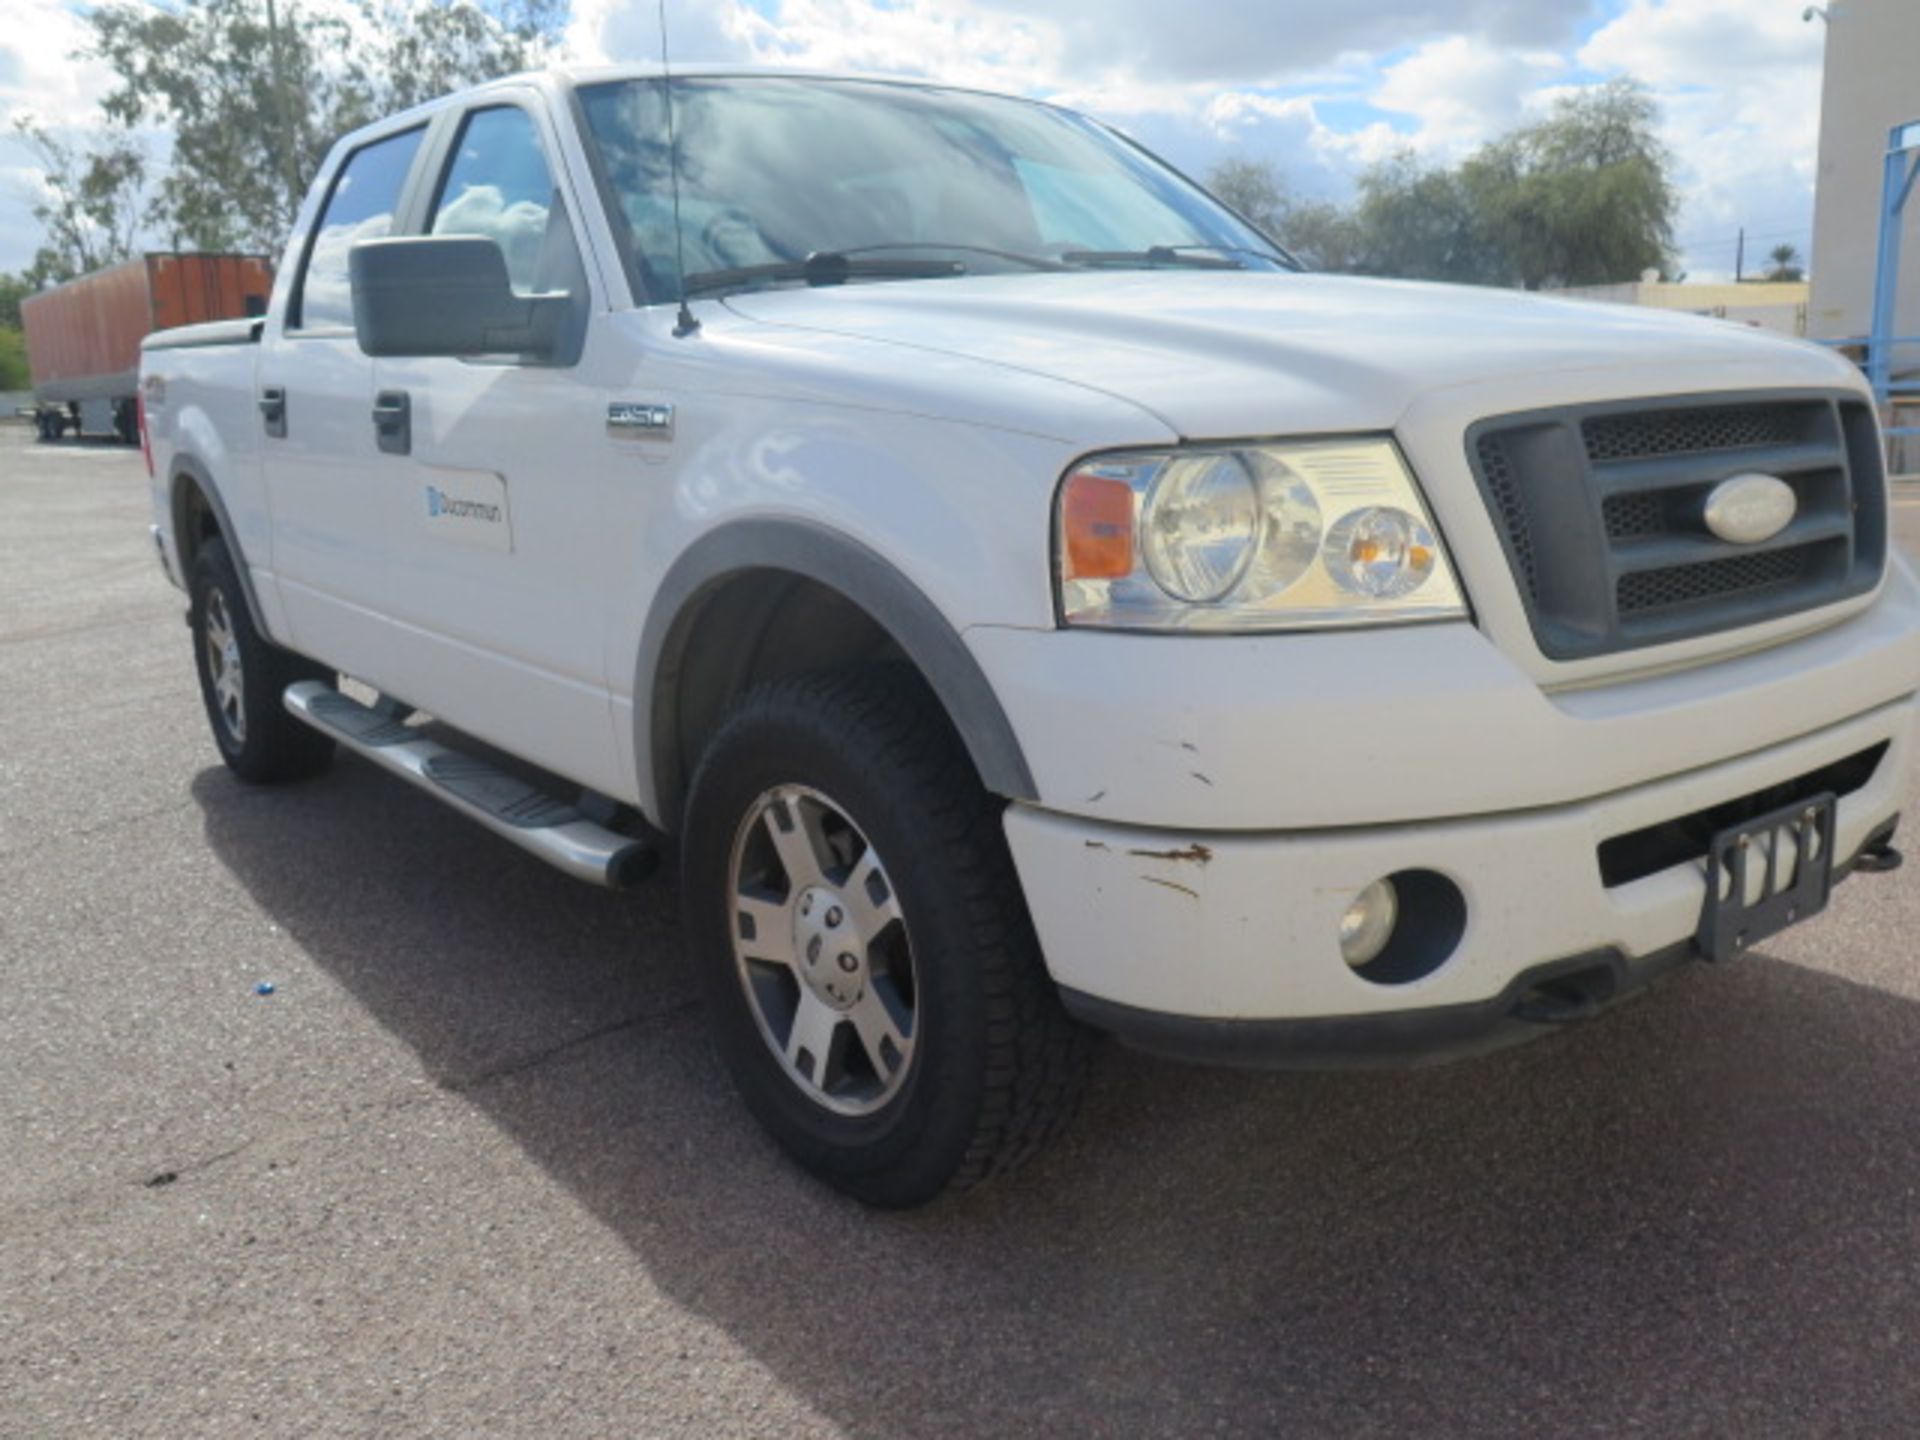 2007 Ford F-150 FX4 Off Road Dual Cab Pickup Truck Lisc CK81171 w/ 5.4L Triton Engine, Automatic - Image 3 of 15